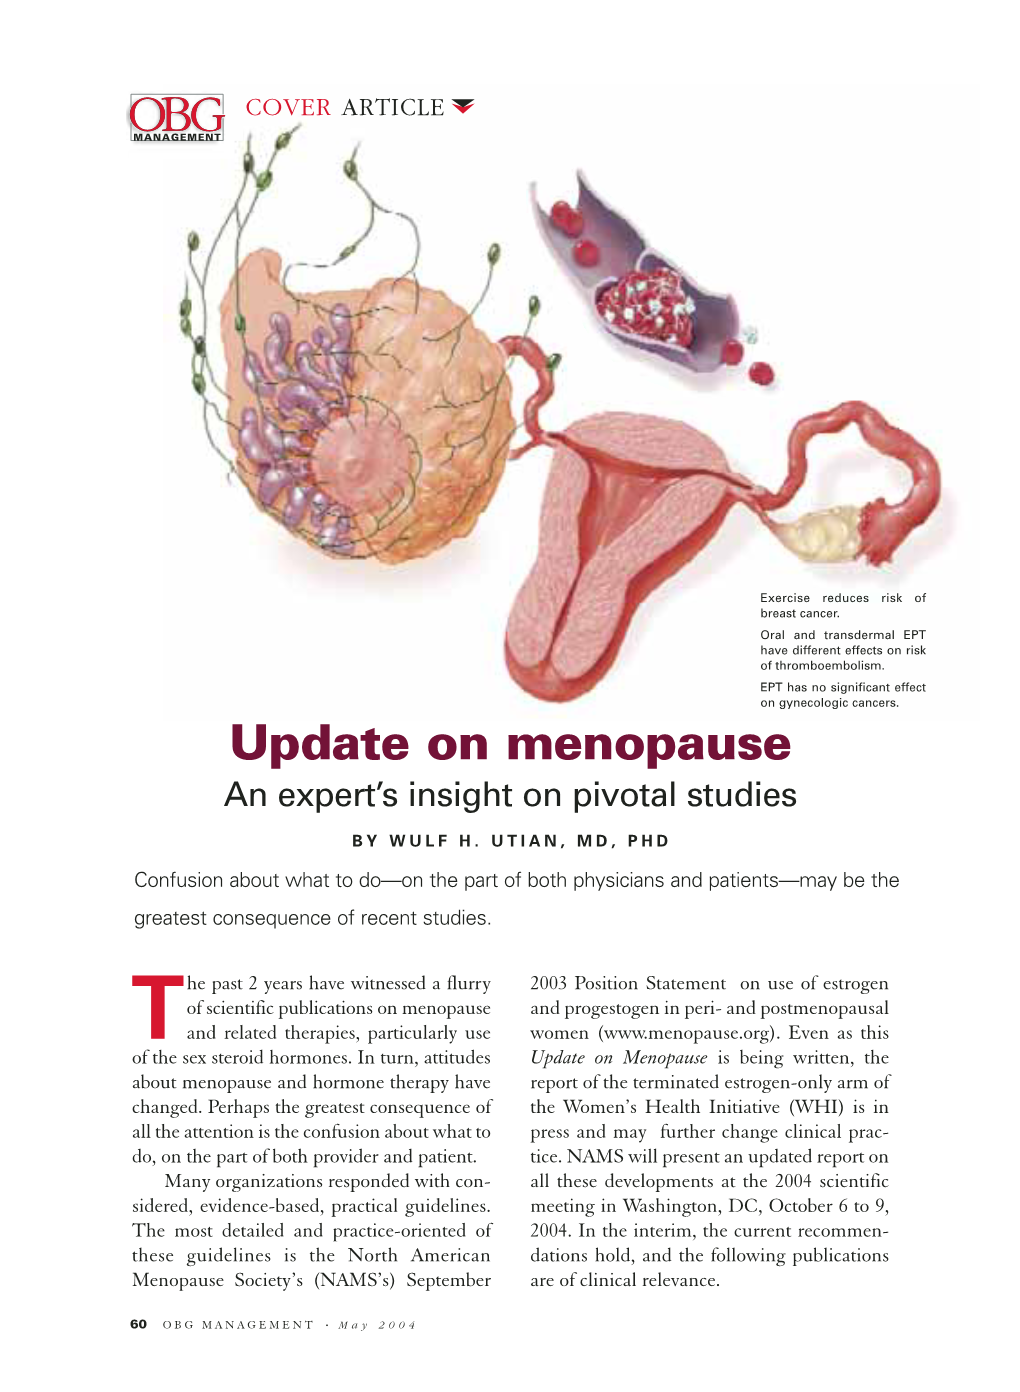 Update on Menopause an Expert’S Insight on Pivotal Studies